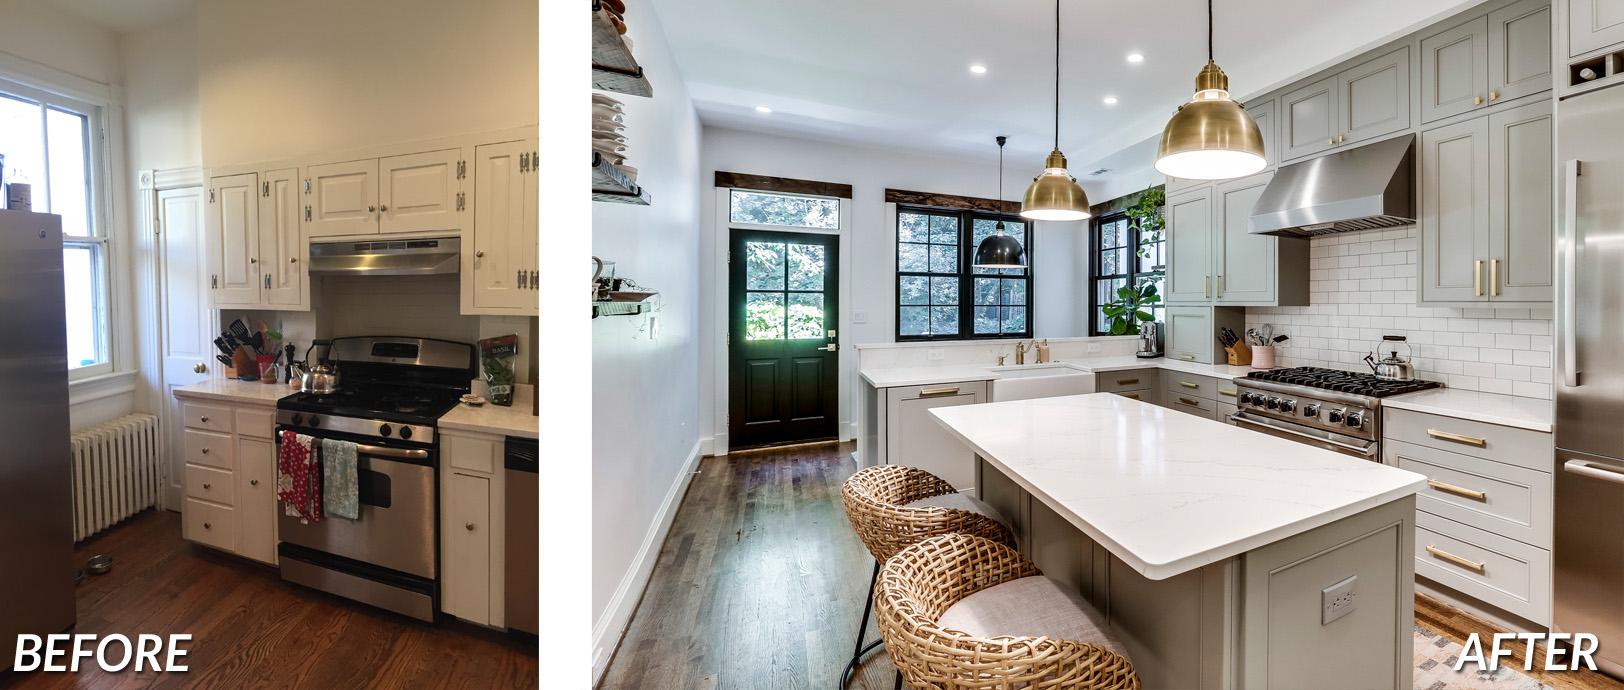 Georgetown Kitchen Renovation Before & After